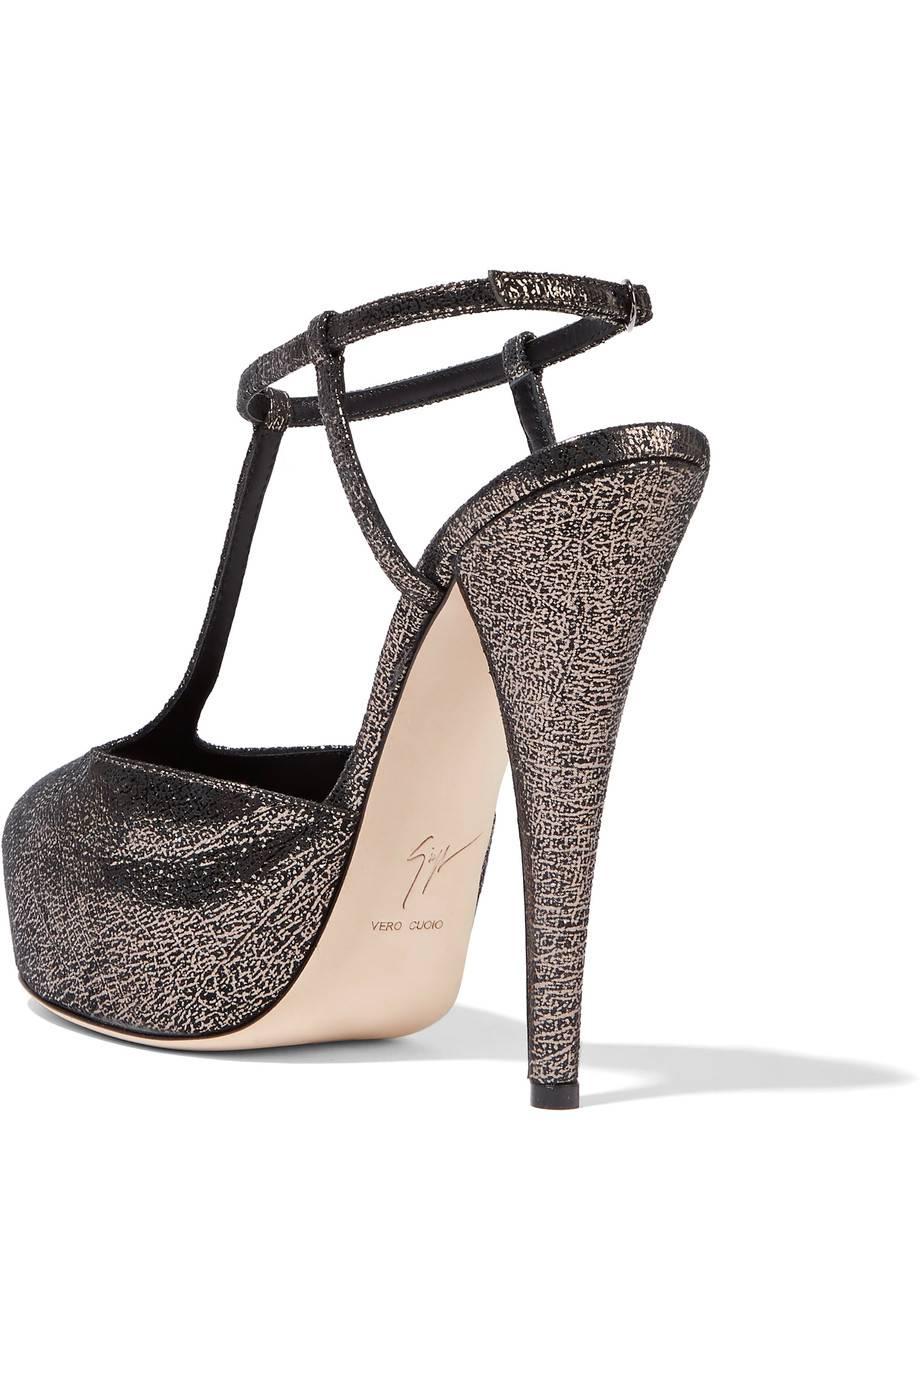 Women's Giuseppe Zanotti NEW & SOLD OUT Crackle Peep Toe T-Strap Sandals Heels in Box